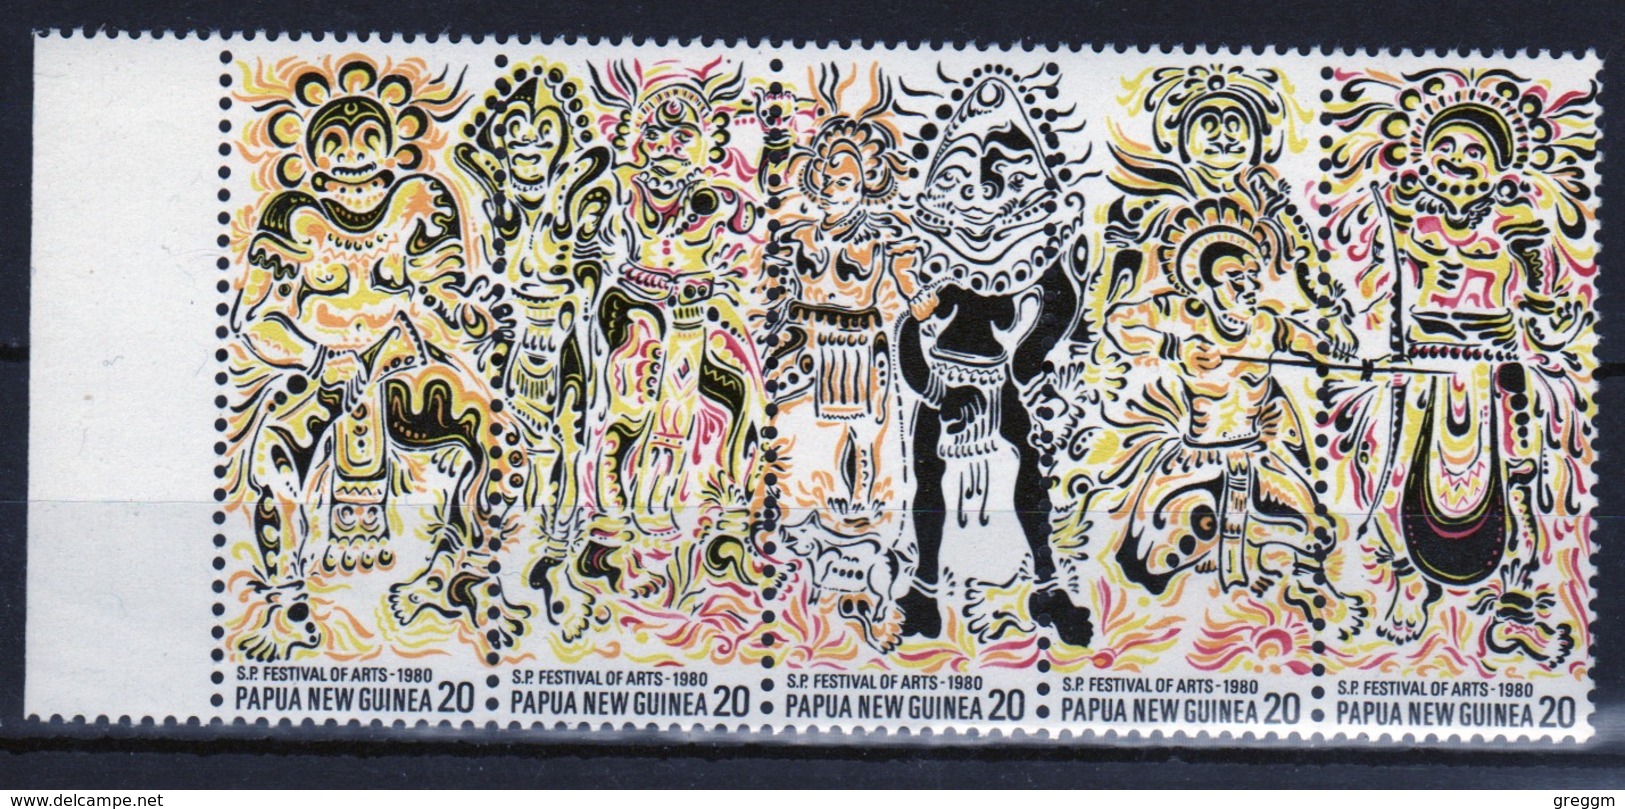 Papua New Guinea Set Of Stamps Issued To Celebrate The Arts Festival Of 1980. - Papua New Guinea